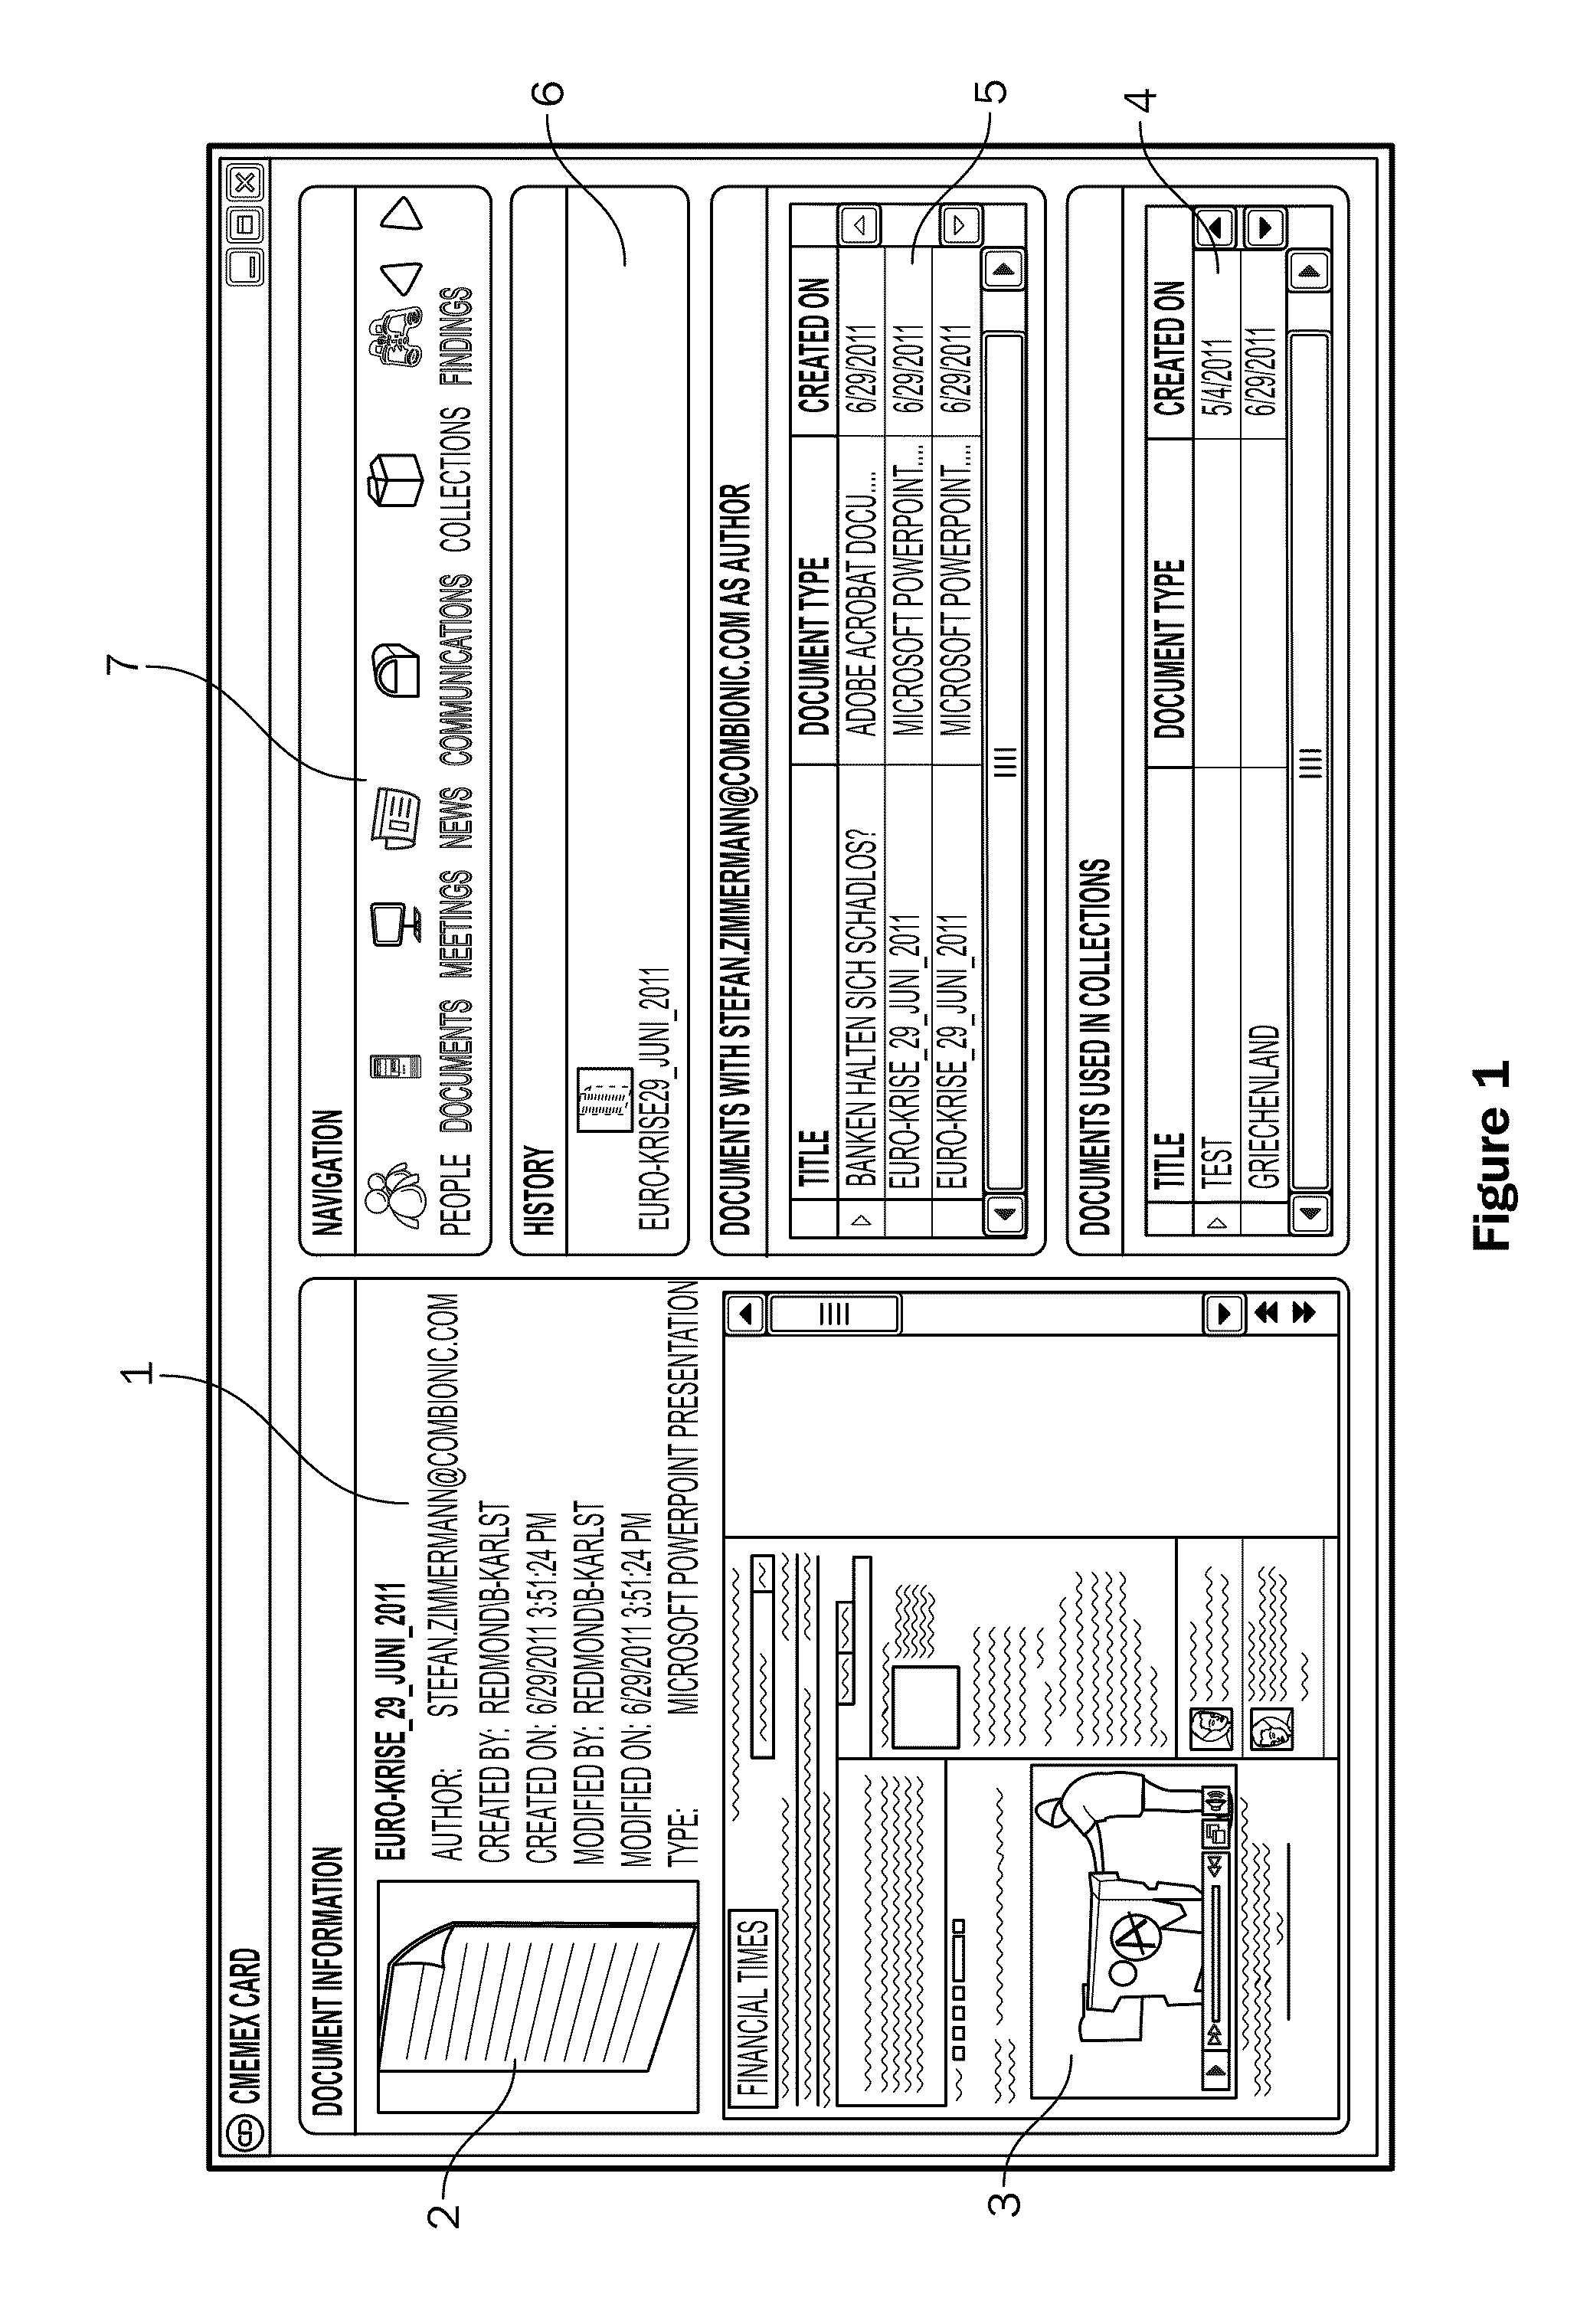 Contextual processing of data objects in a multi-dimensional information space